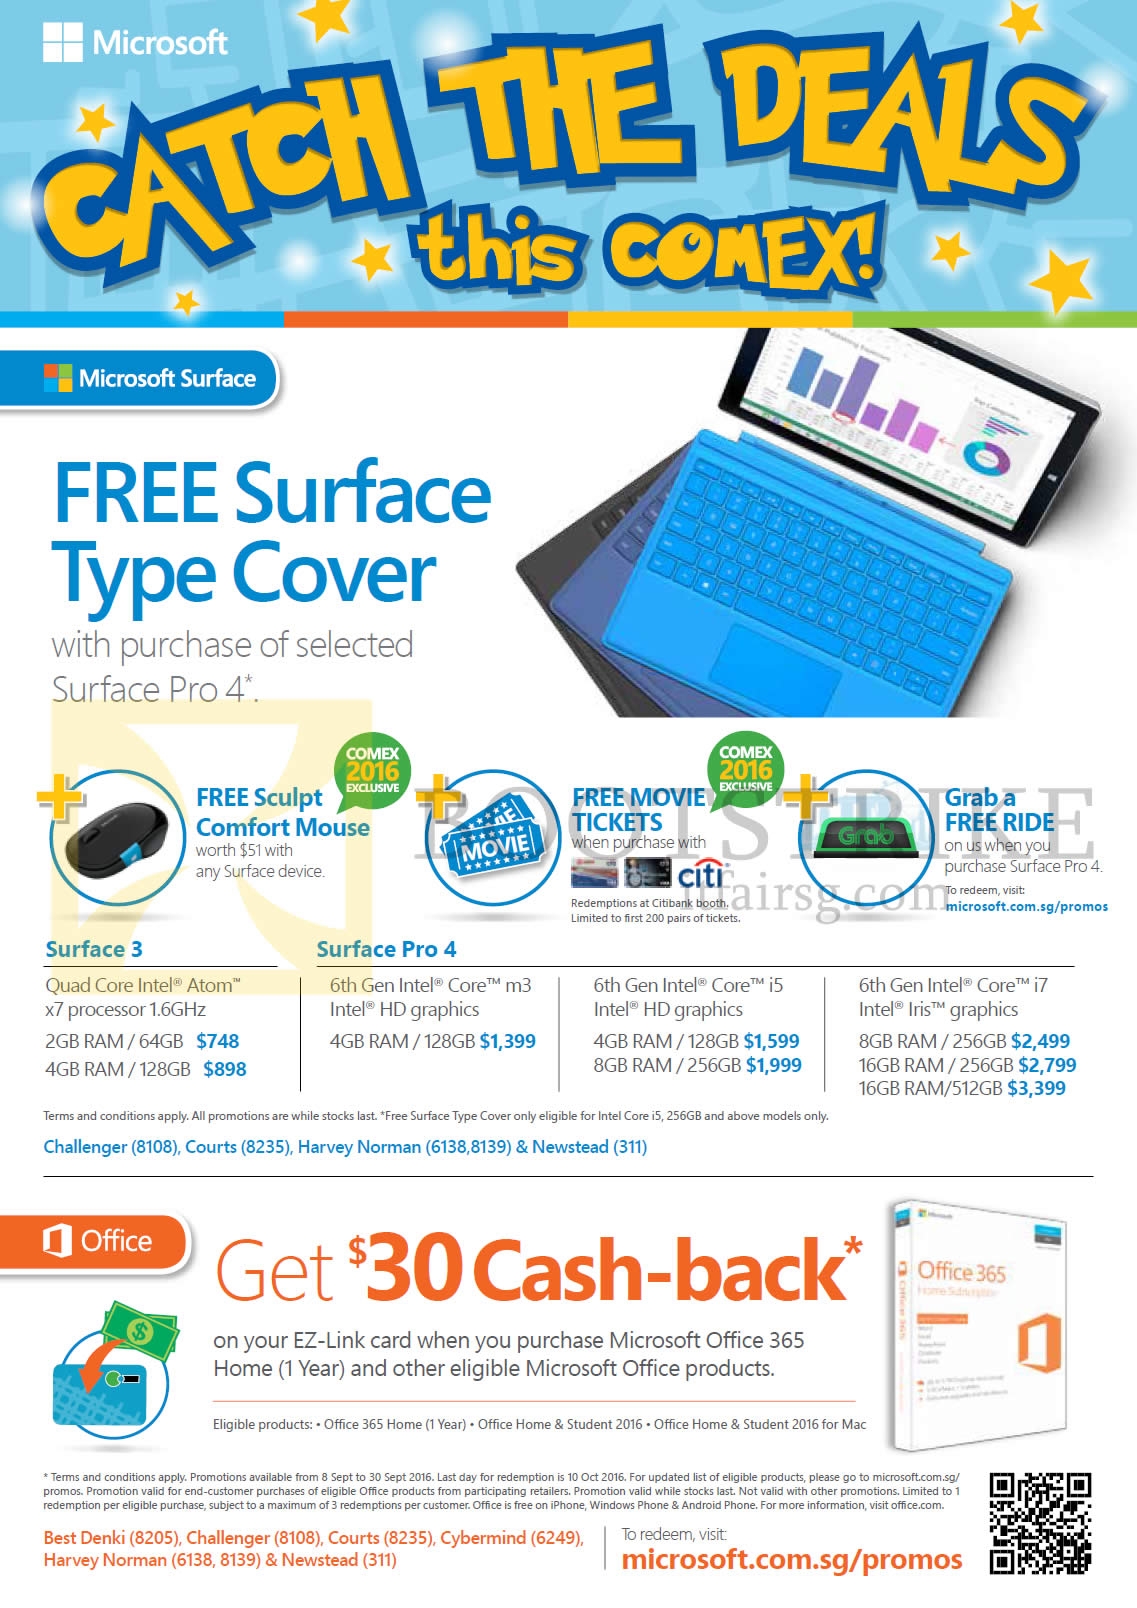 COMEX 2016 price list image brochure of Microsoft Surface Pro 4.0 Tablet, Office 365 Cashback